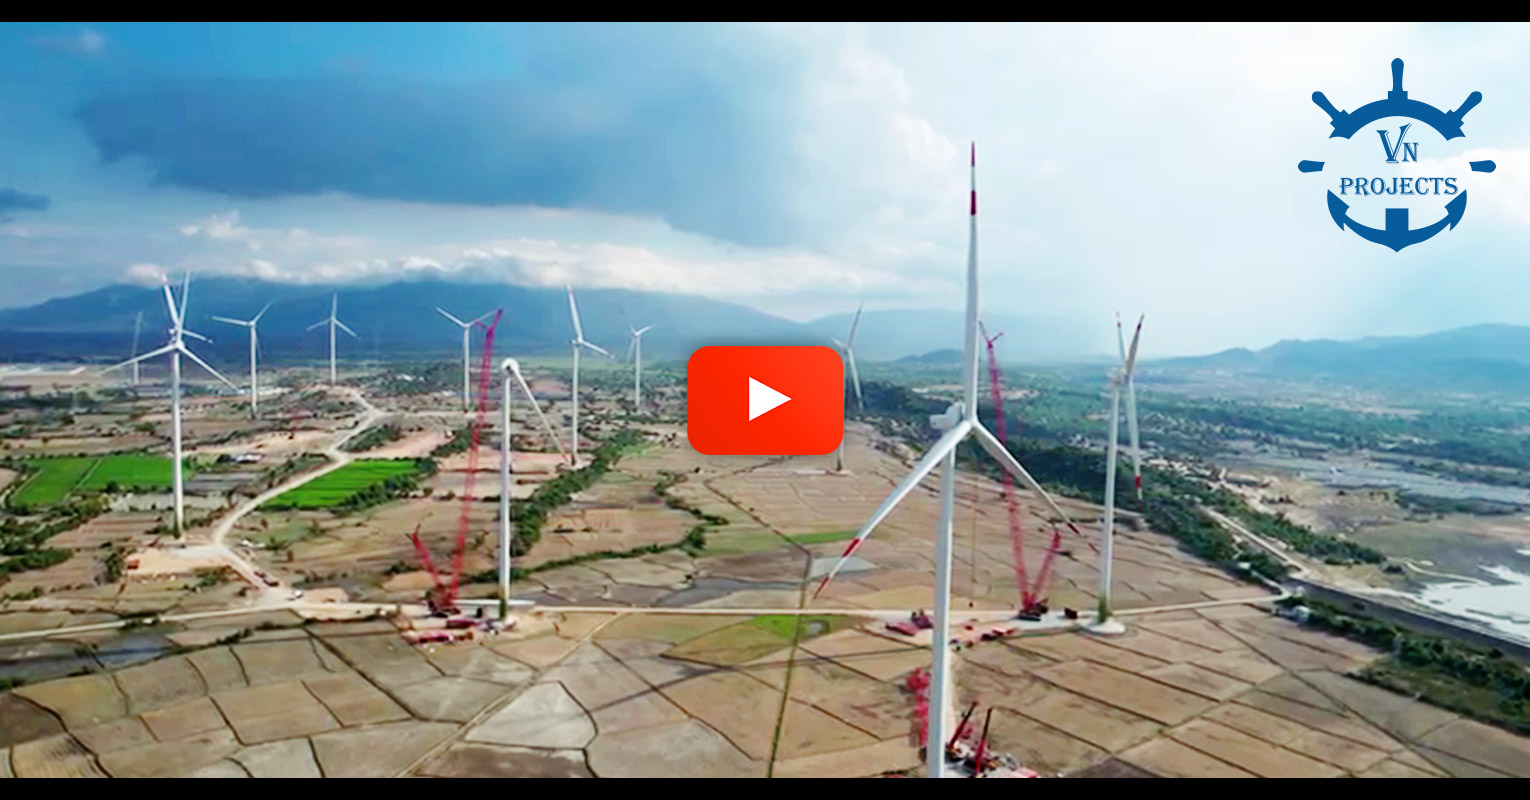 Video - VN Projects Shows Their Capabilities in this Promotional Video